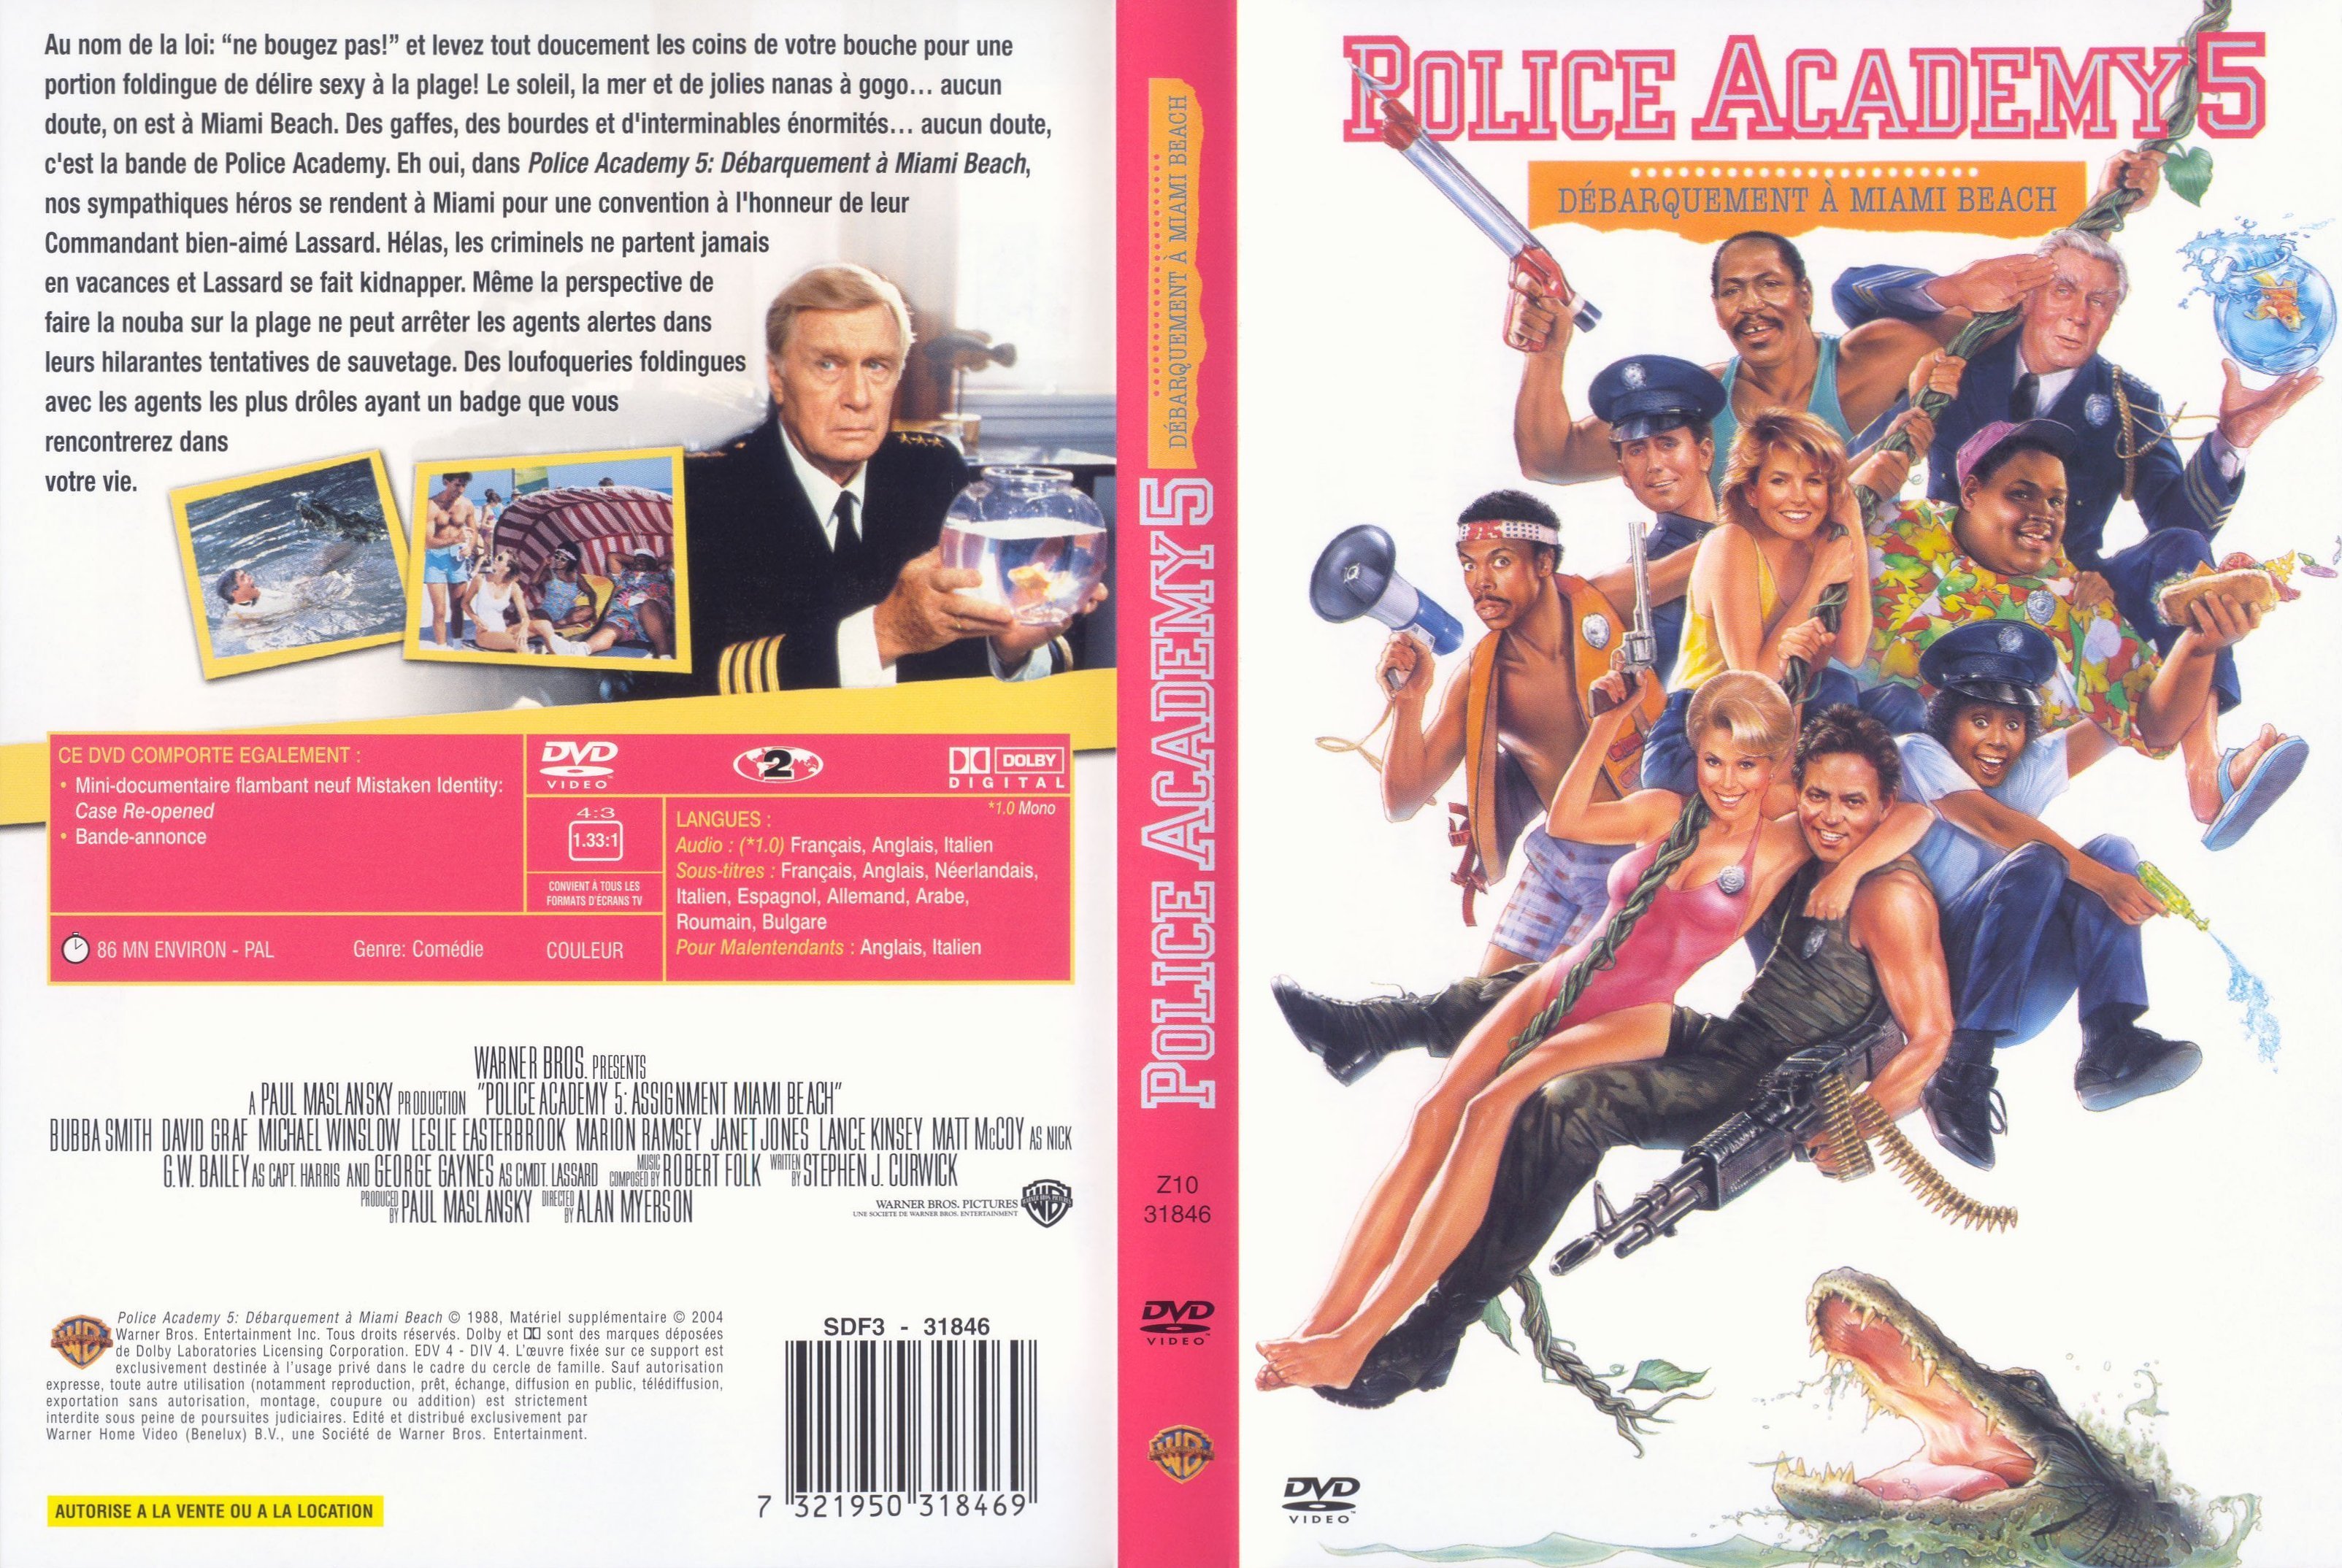 Jaquette DVD Police academy 5